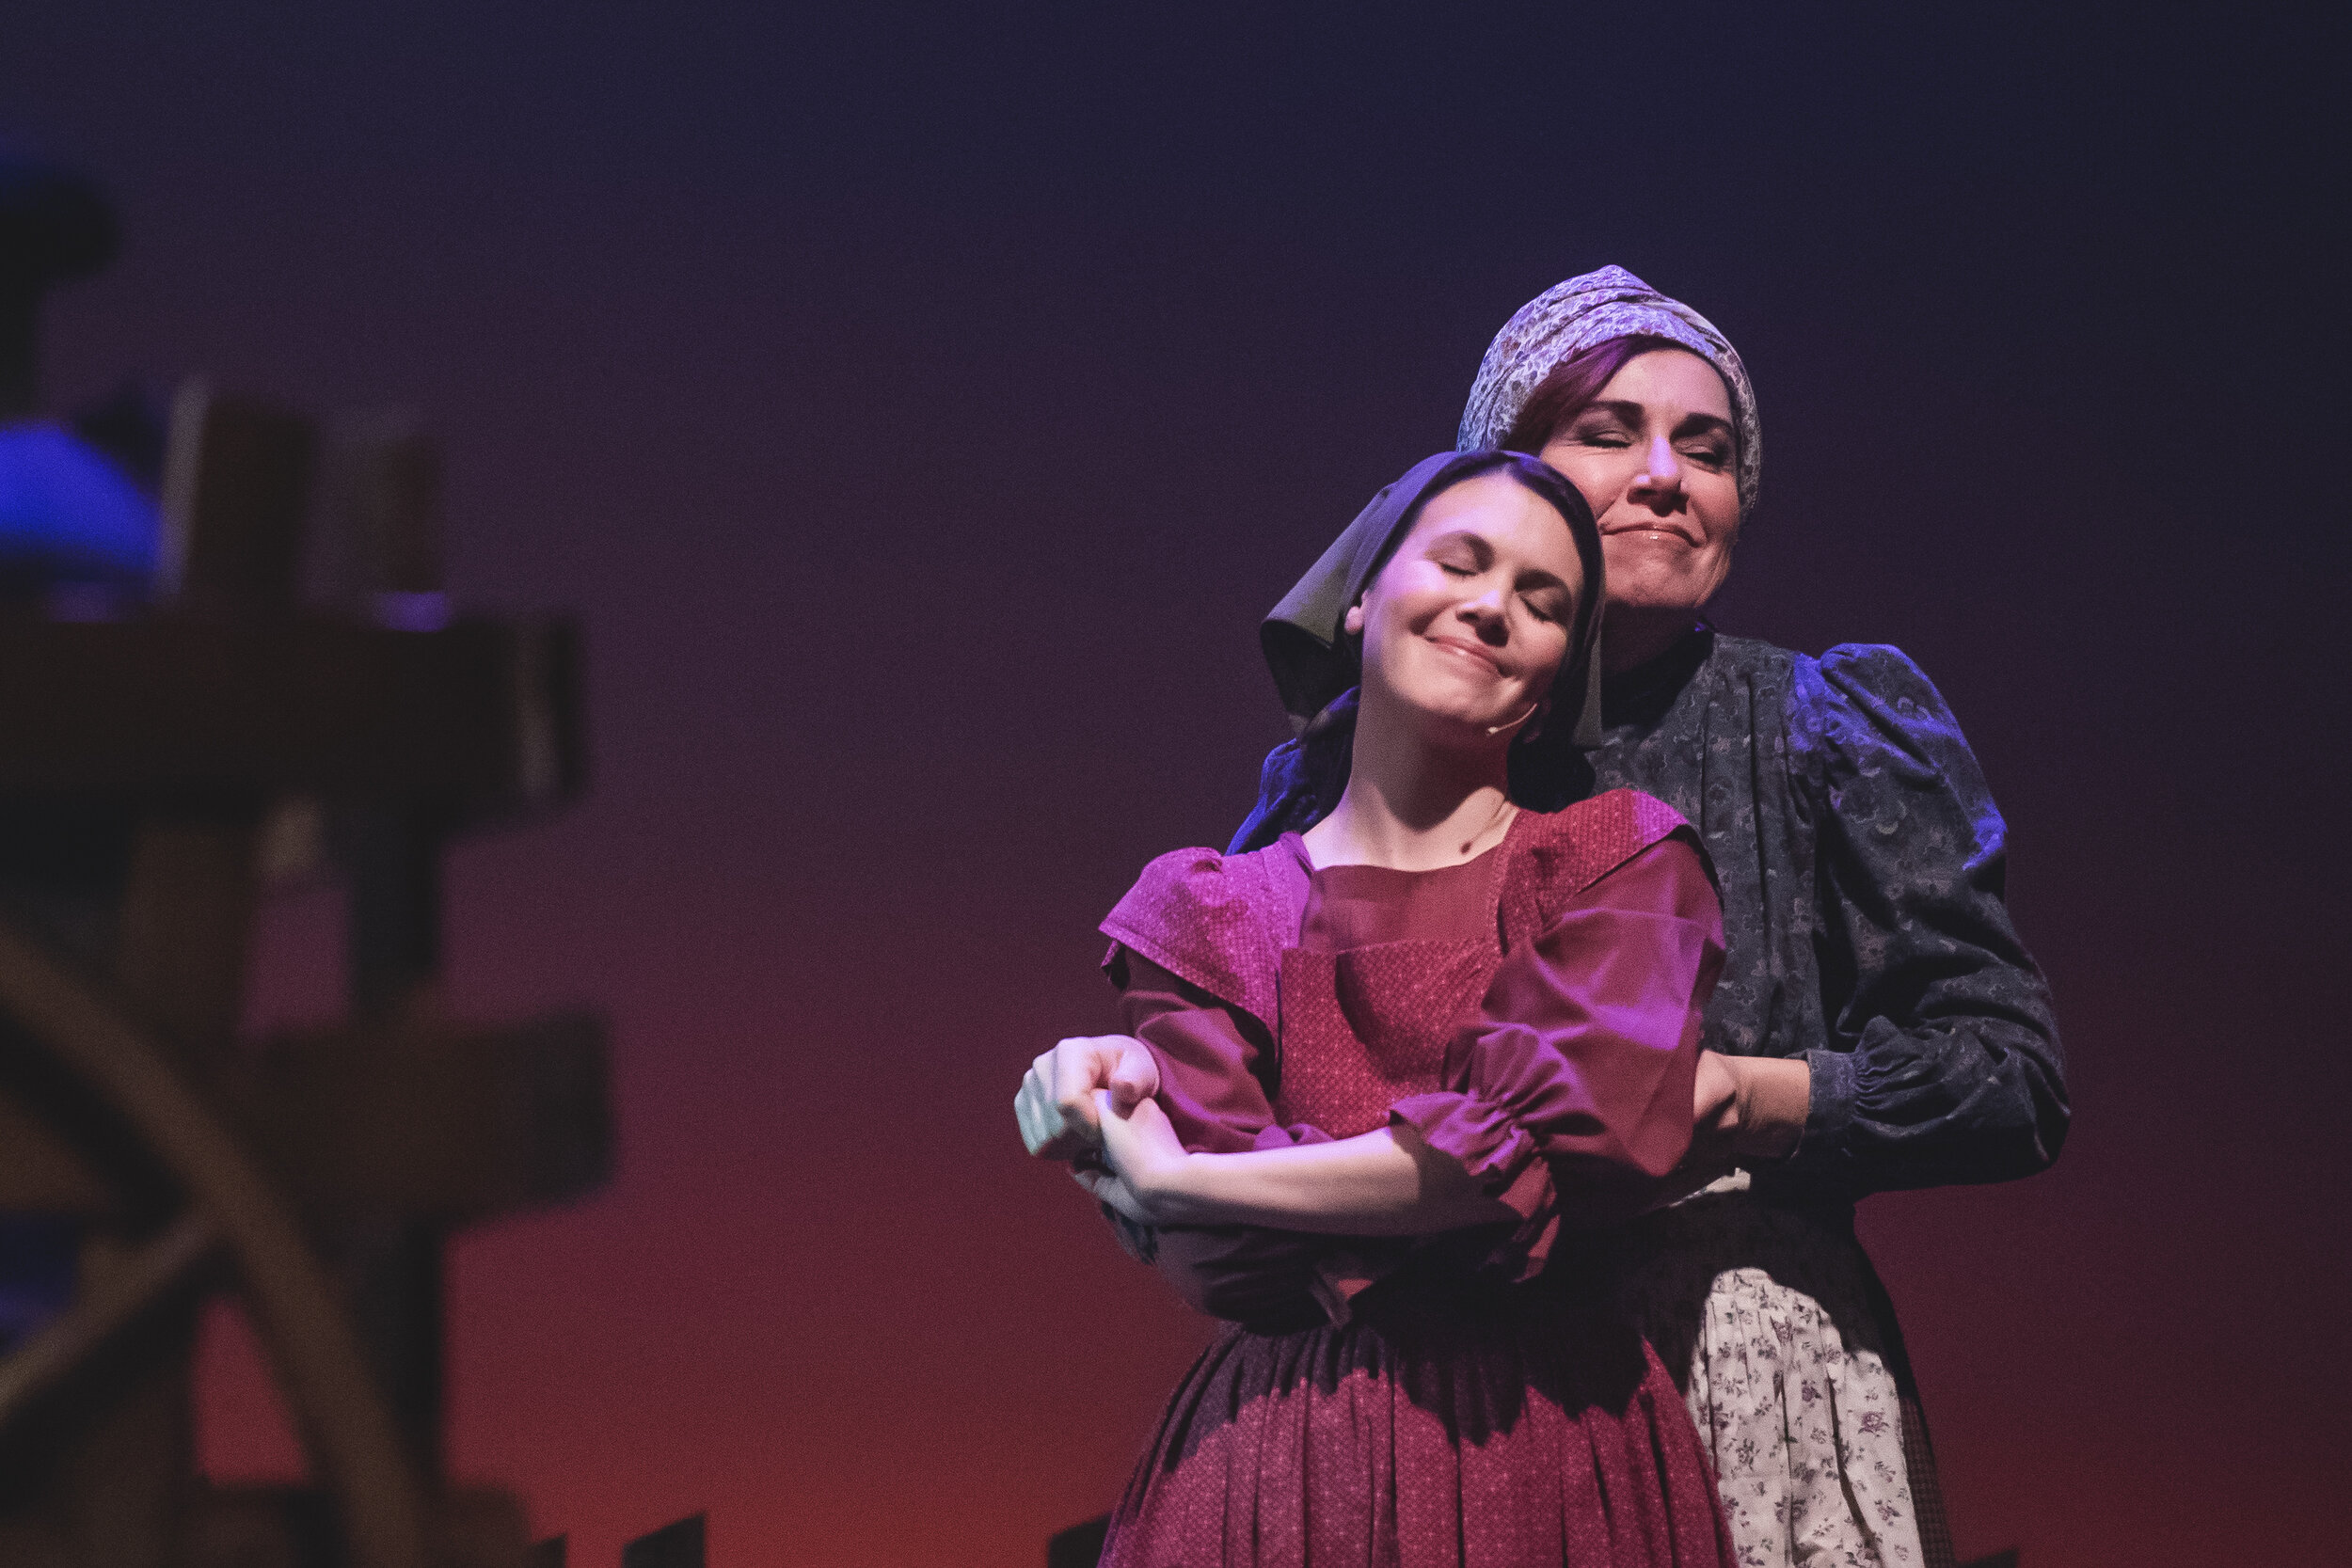 FIDDLER ON THE ROOF with DEBBIE GRAVITTE - BROADWAY LIVE!